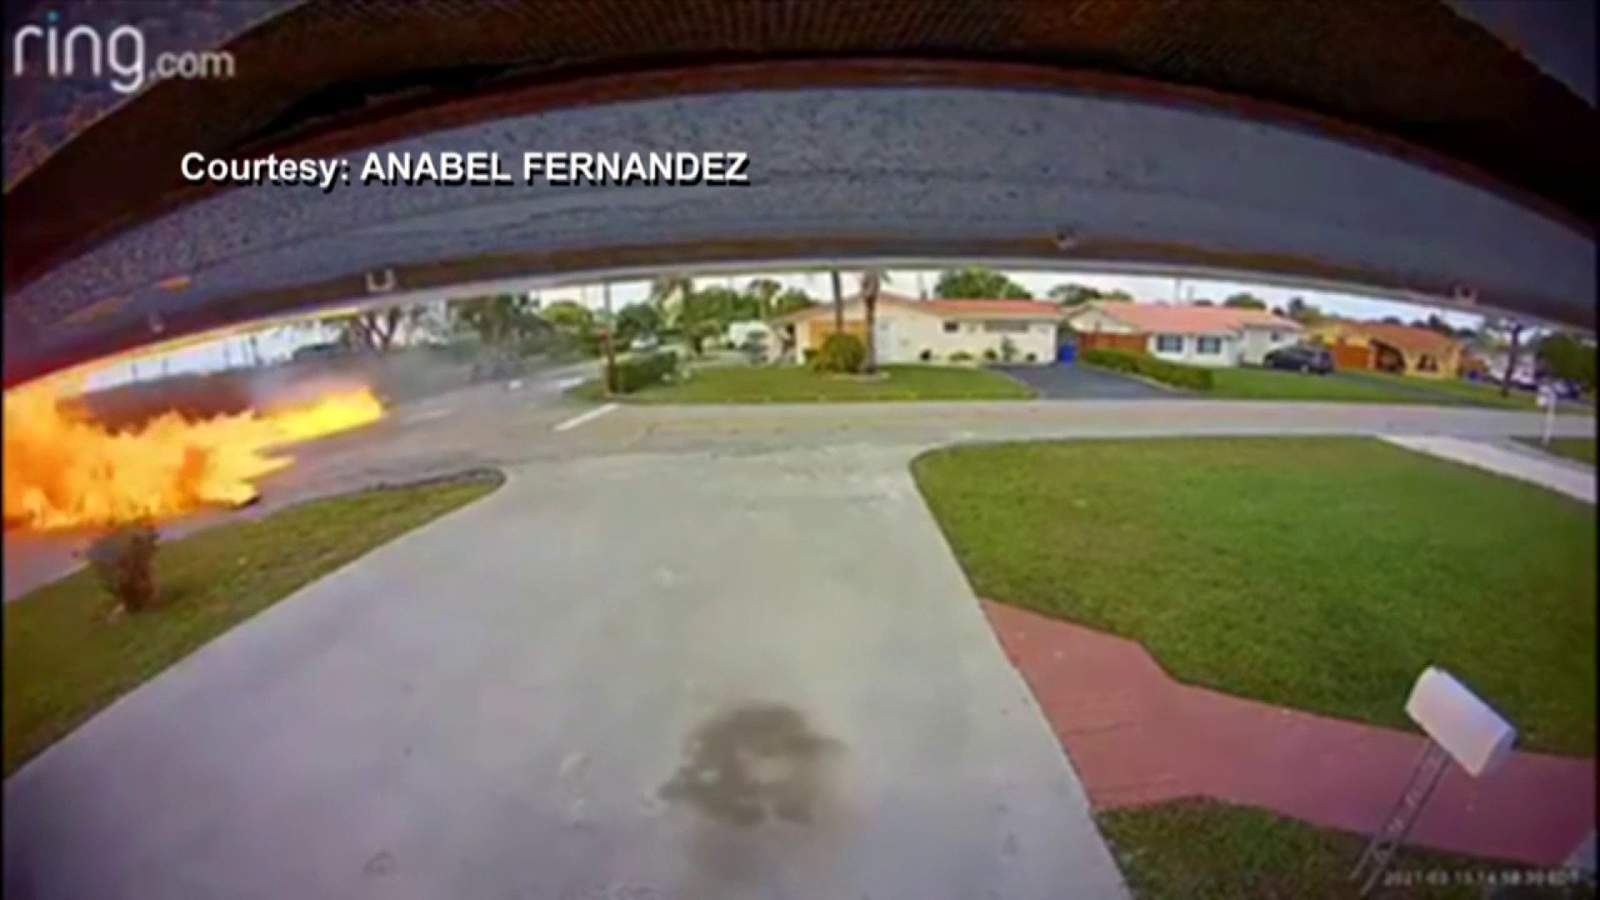 UPDATE: Plane backfired before crash in Florida neighborhood that killed child on the ground